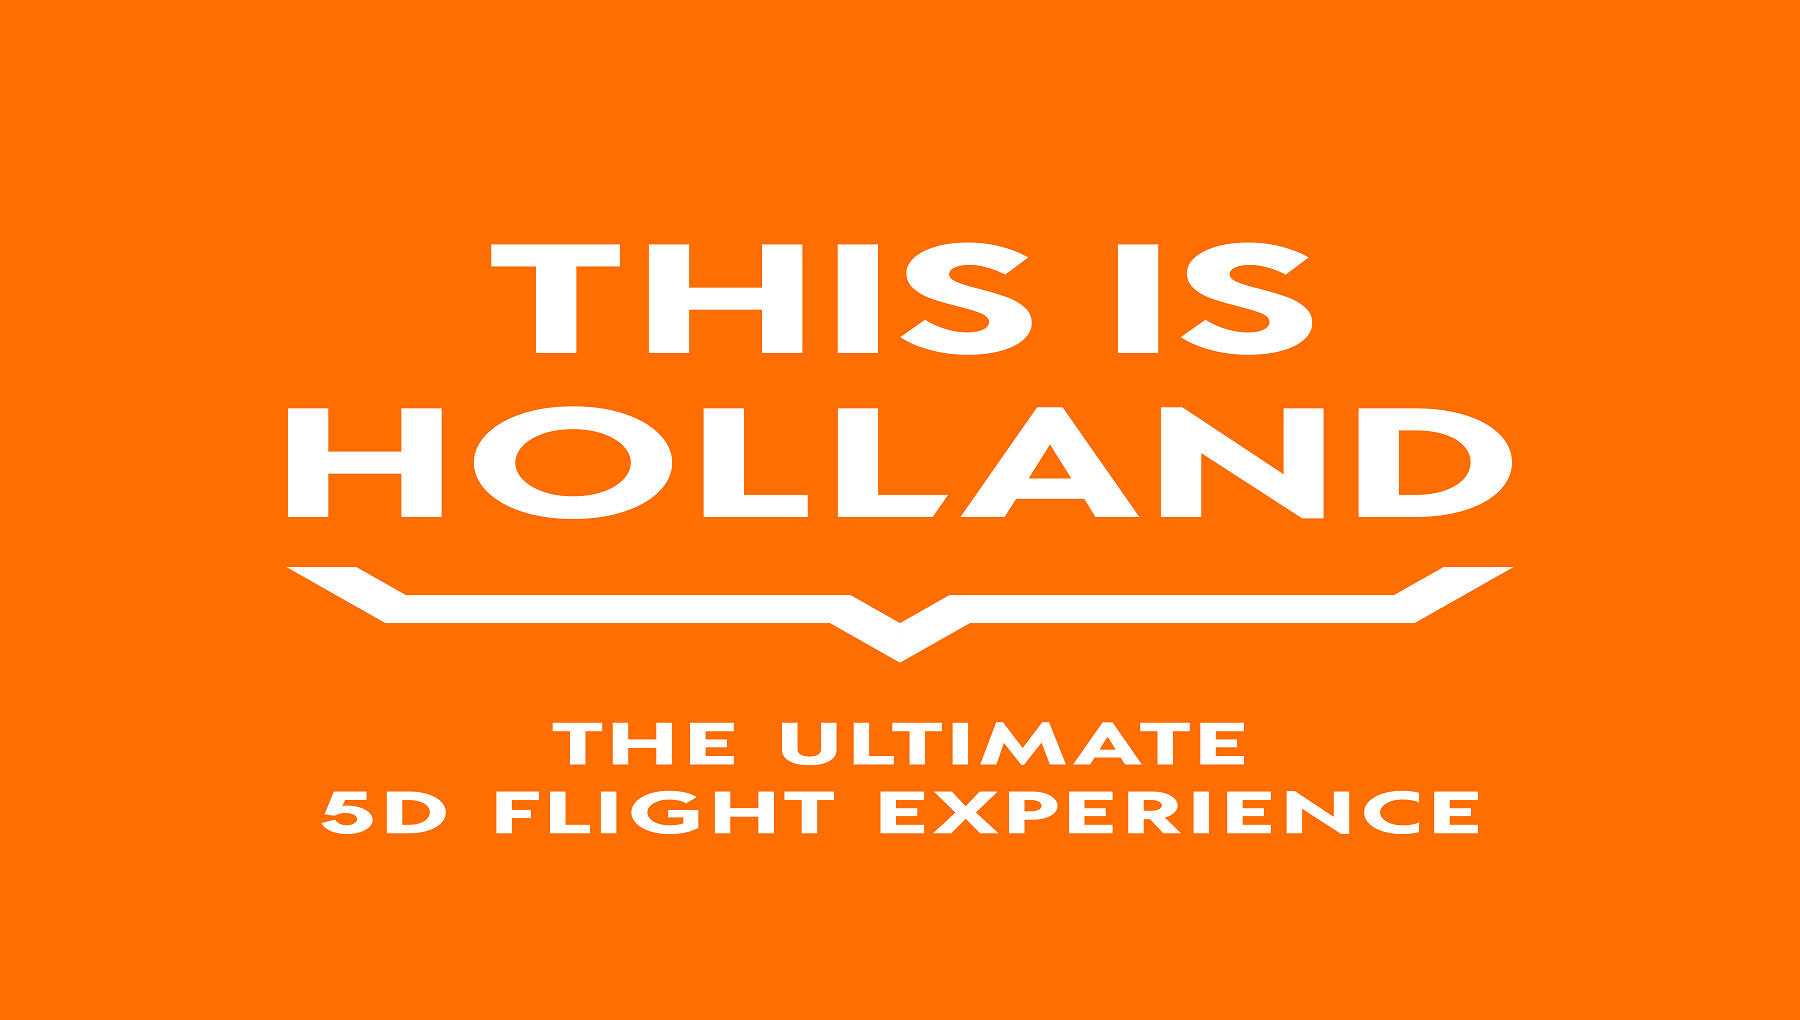 THIS IS HOLLAND